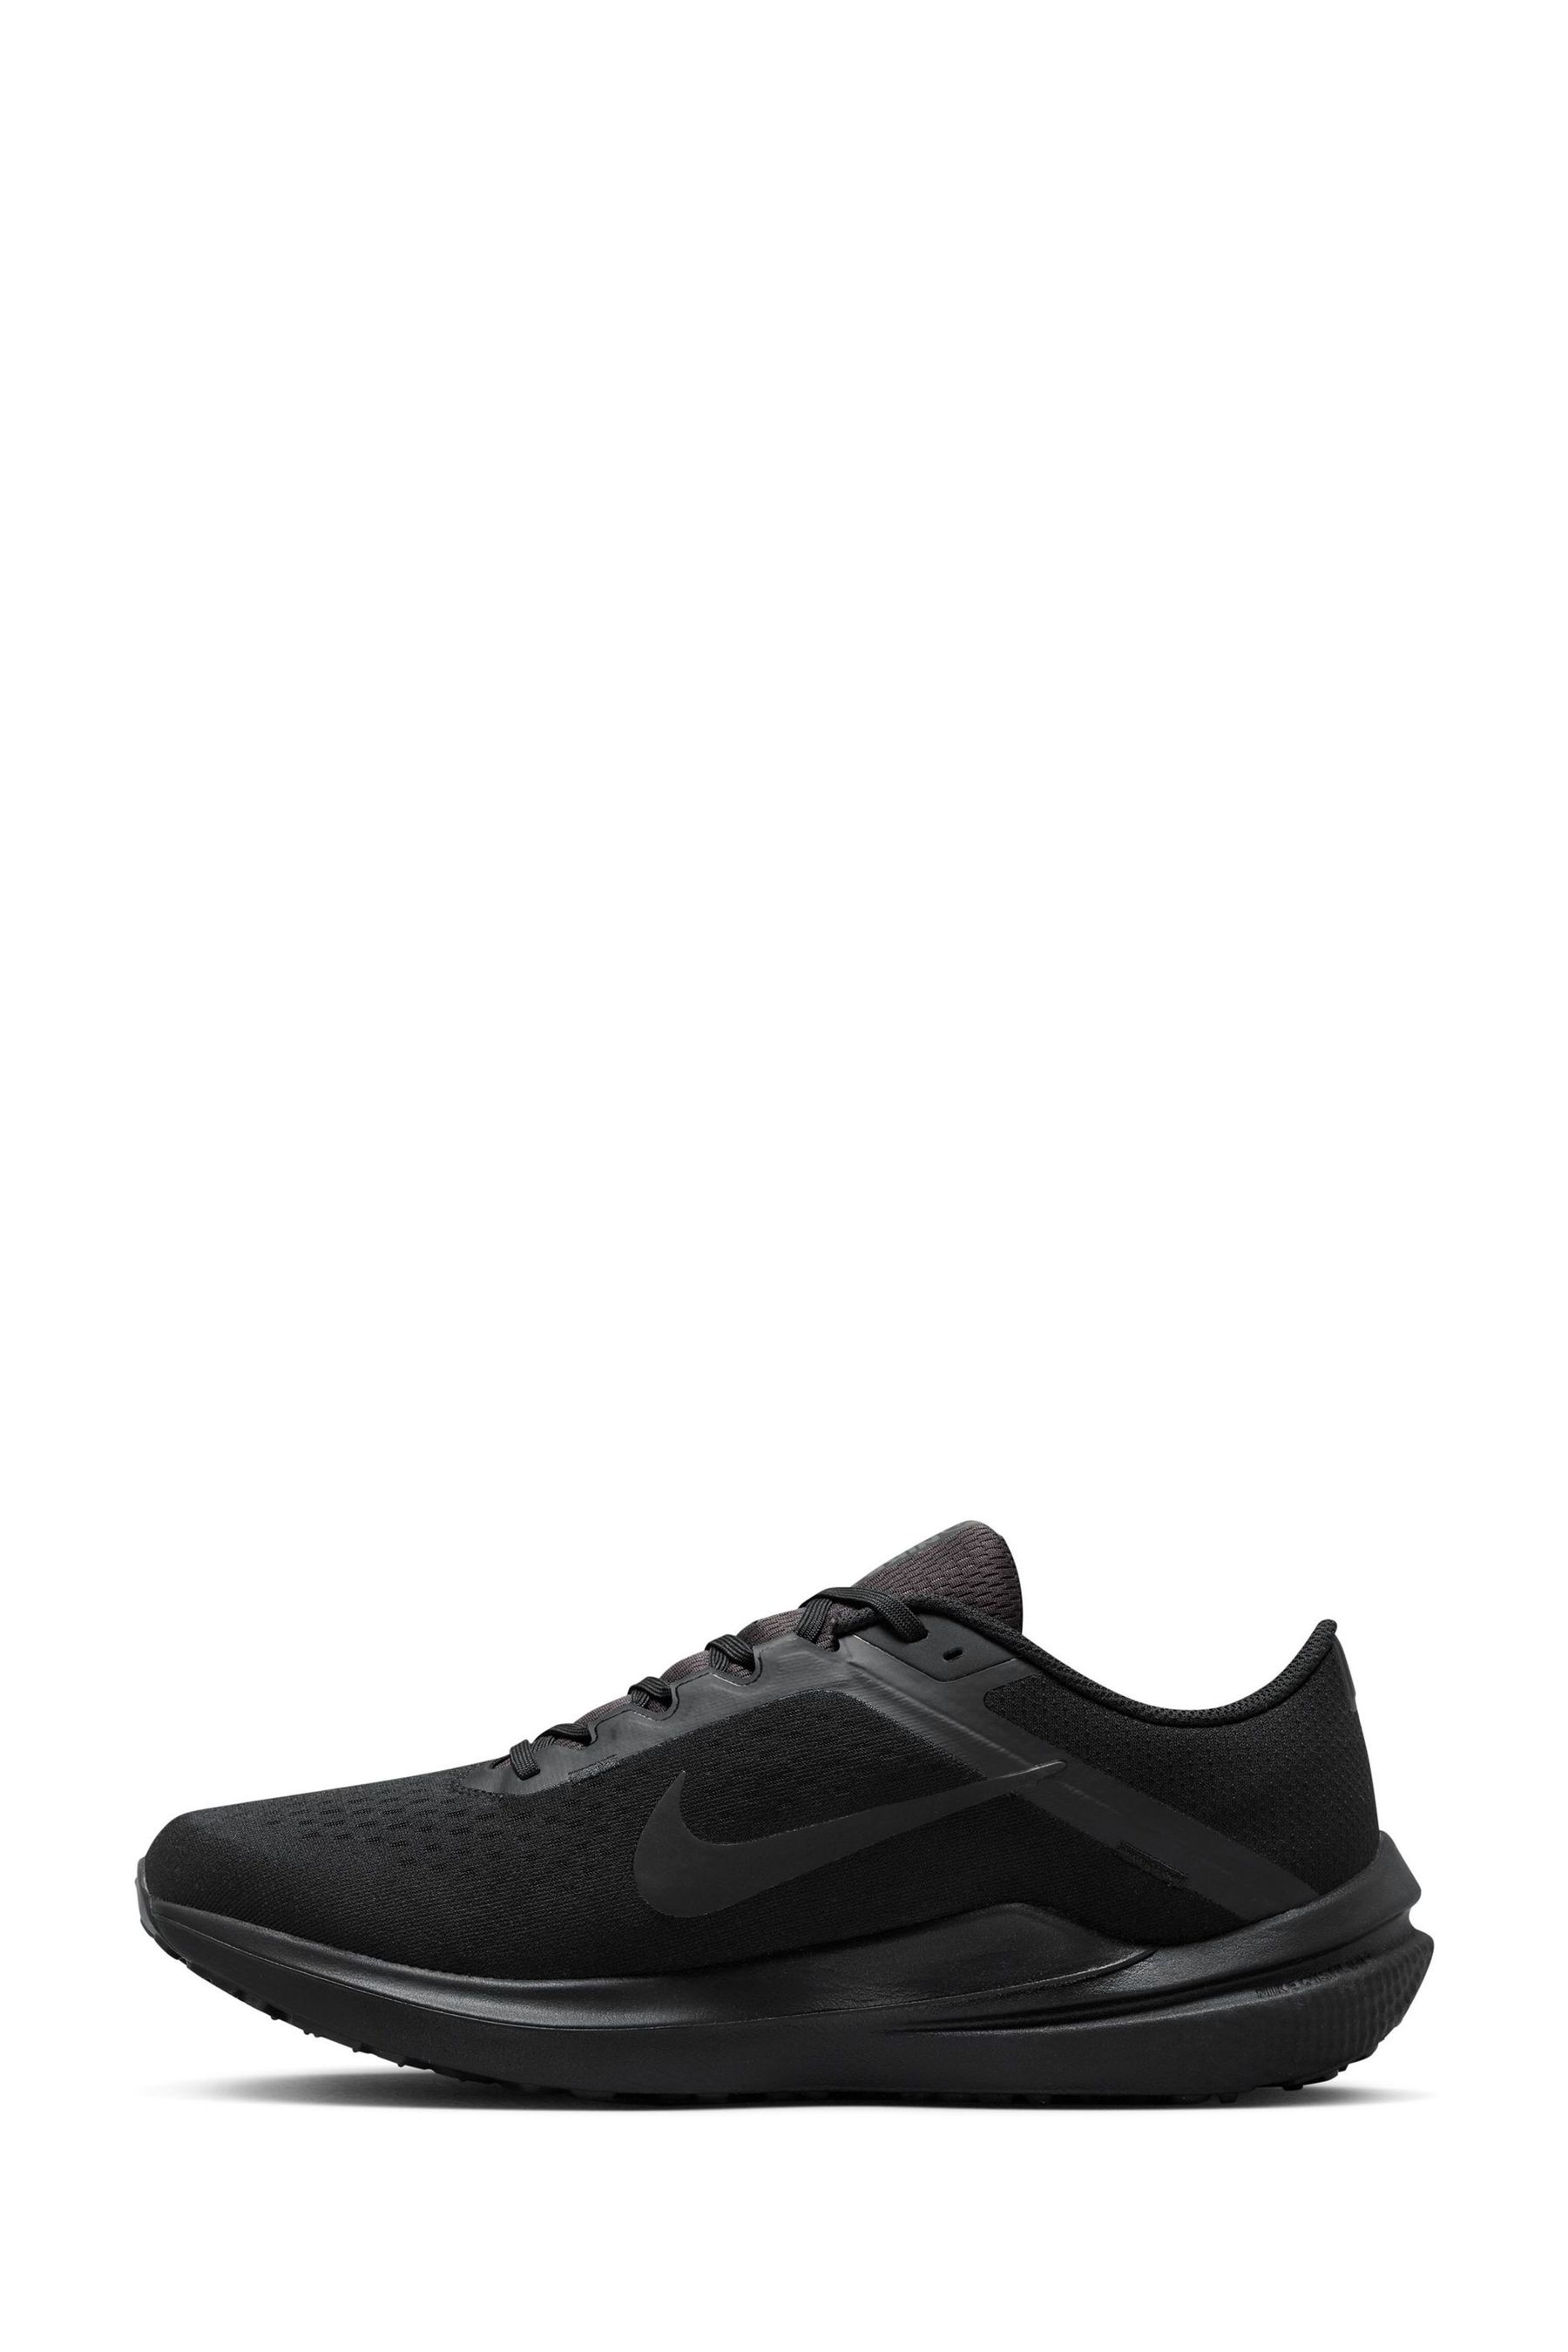 Buy Nike Black Air Winflo 10 Running Trainers from the Next UK online shop